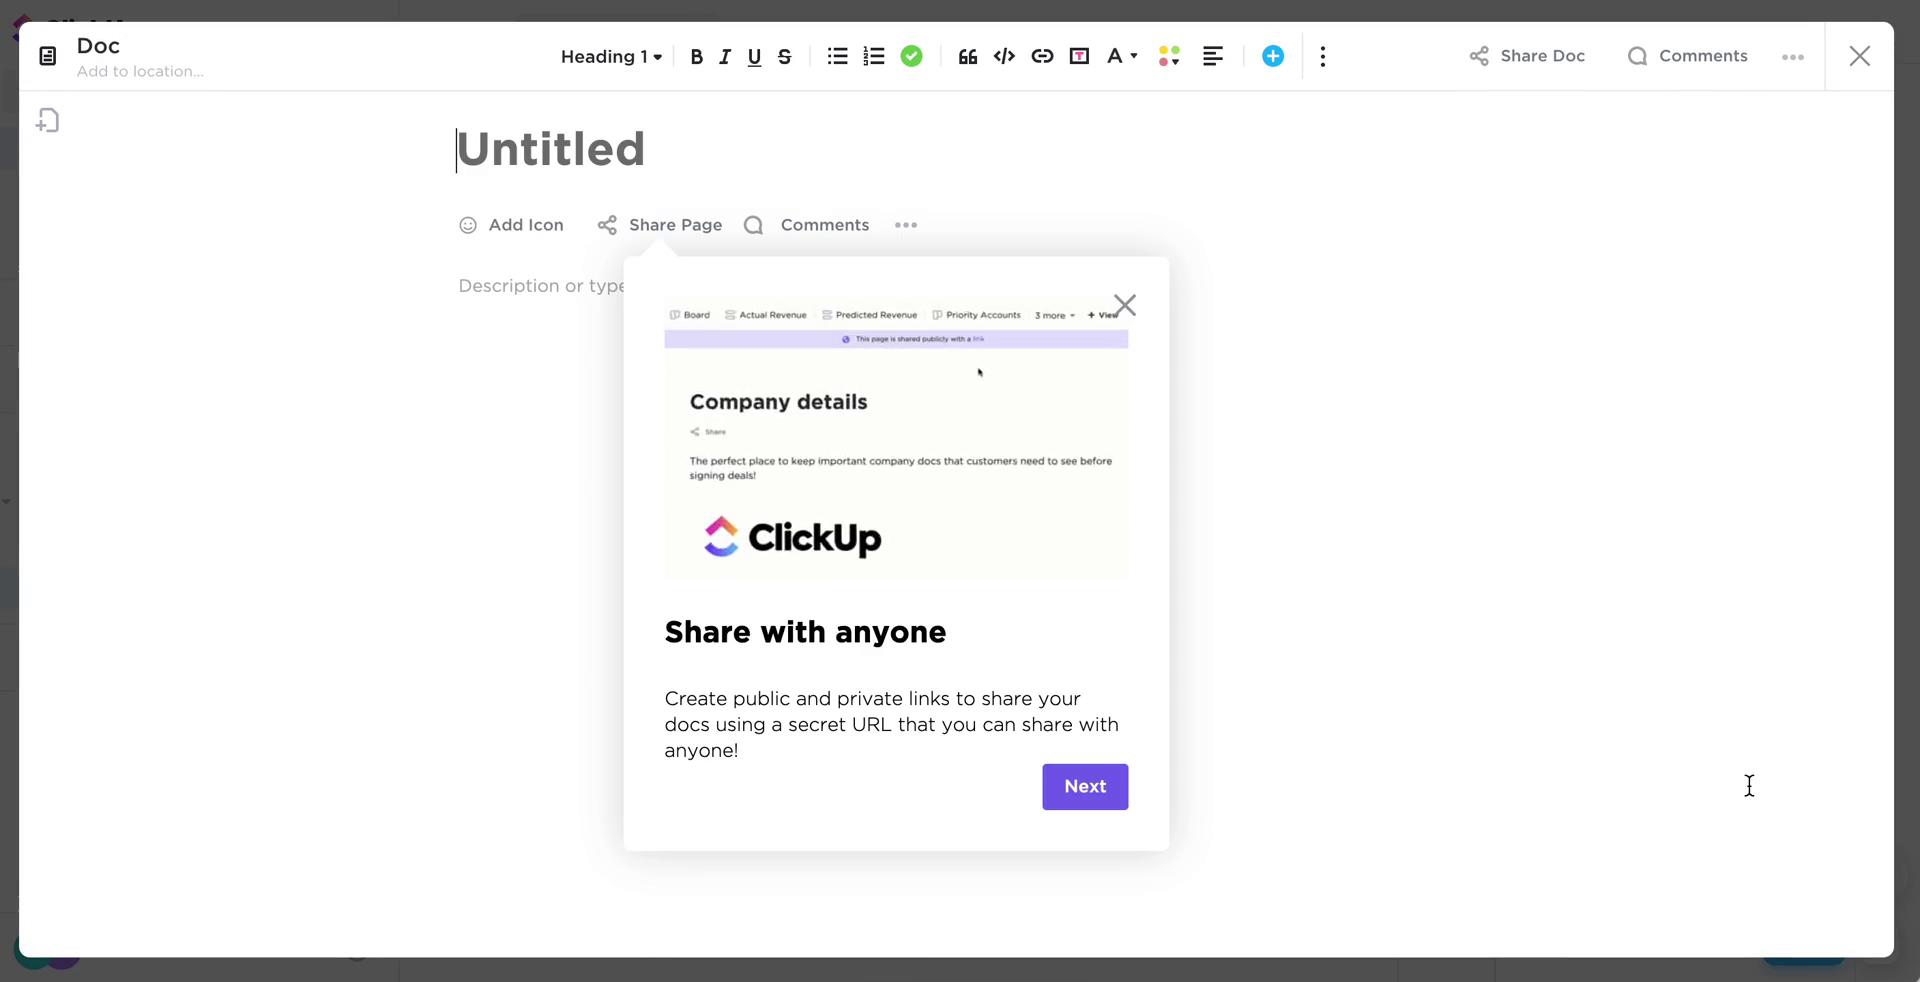 Screenshot of Guided tour on Creating a document on ClickUp user flow